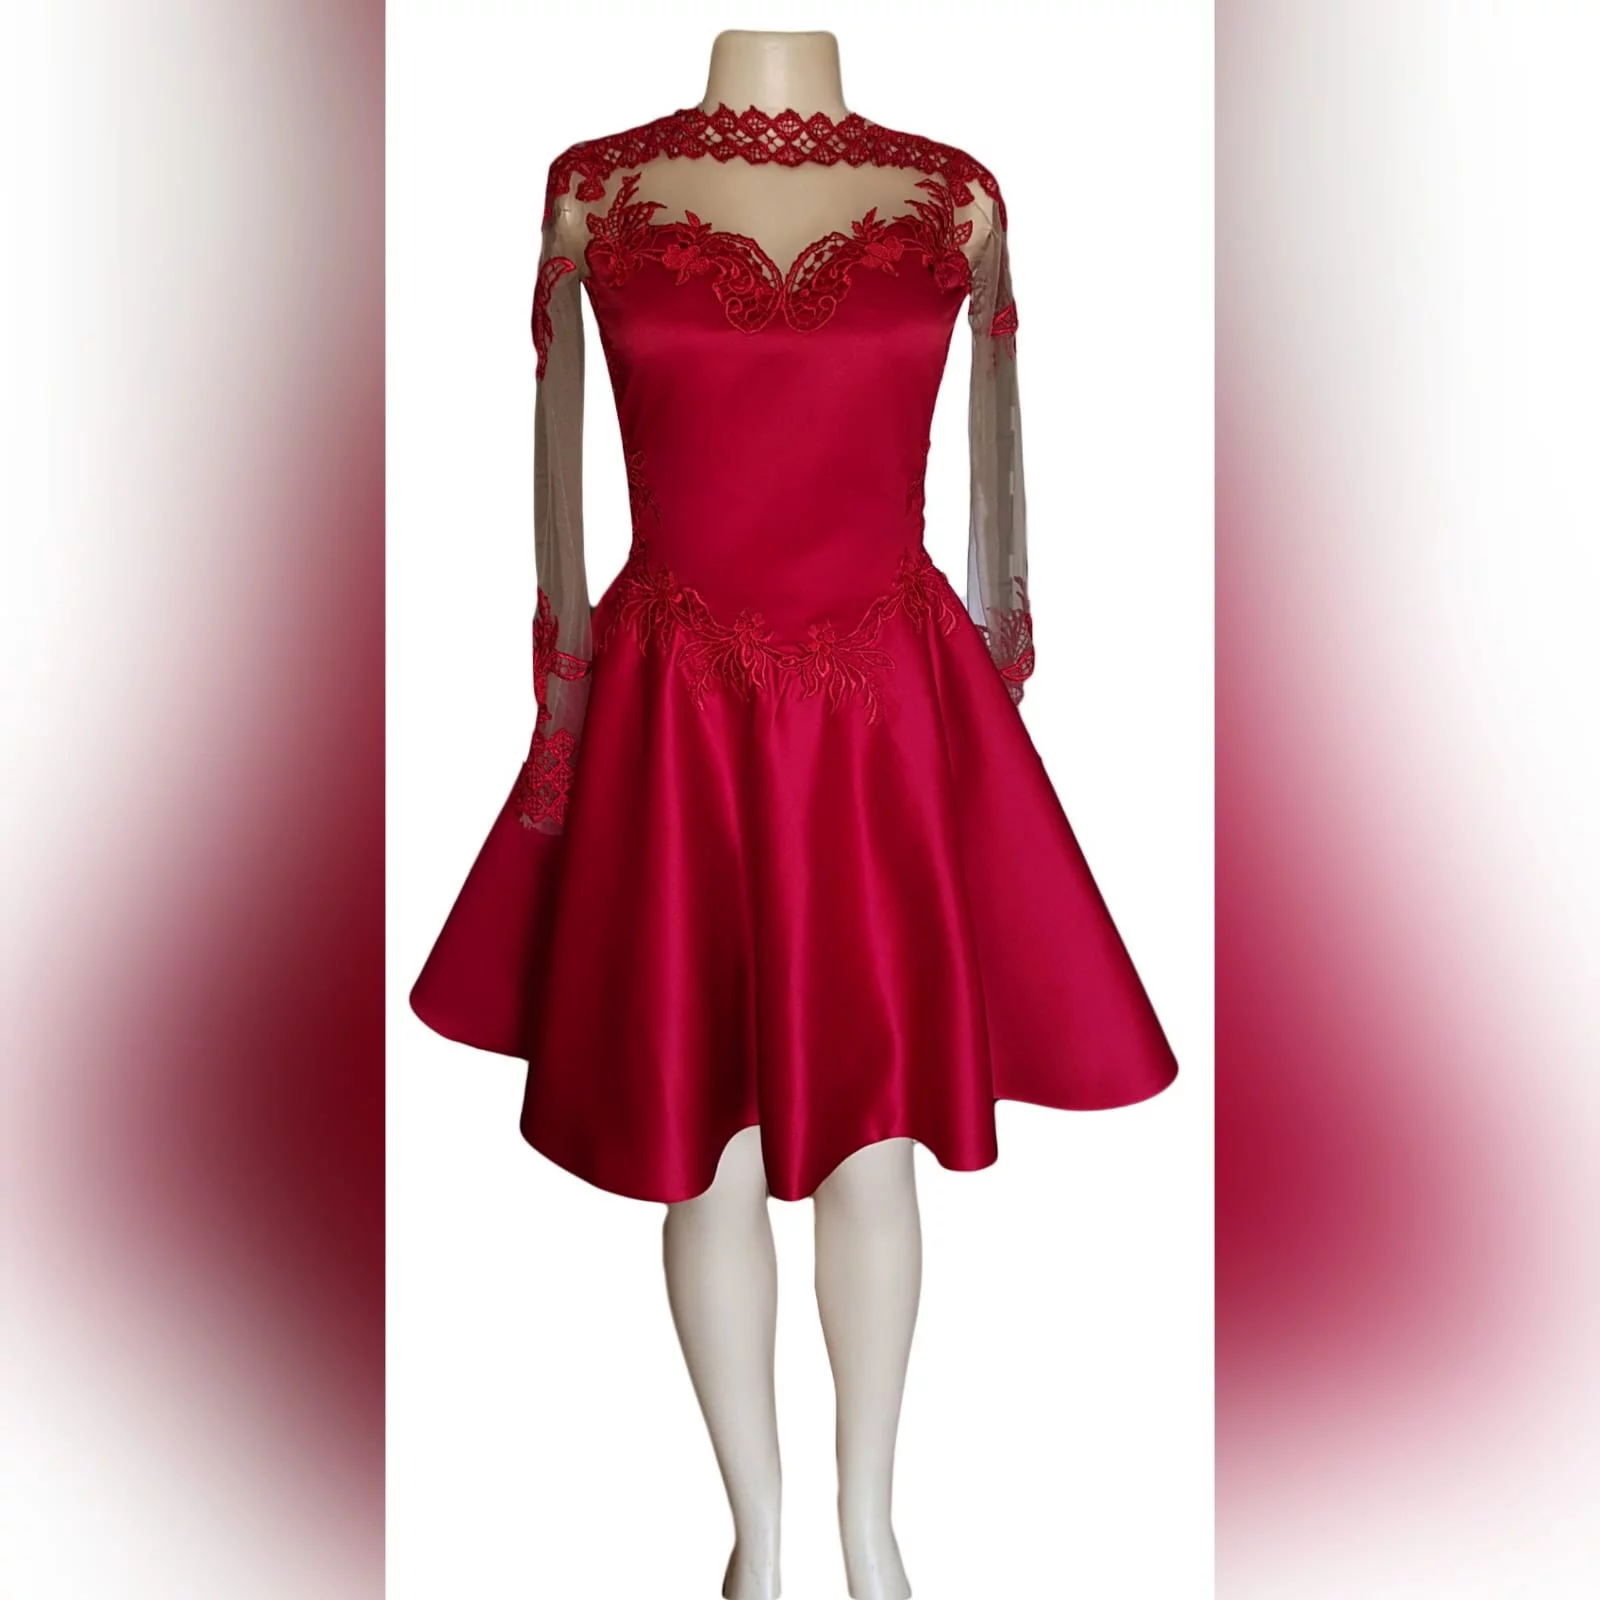 Red short satin prom dress 4 red short satin prom dress with an illusion neckline detailed with lace, long illusion lace sleeves. Illusion back detailed with lace.